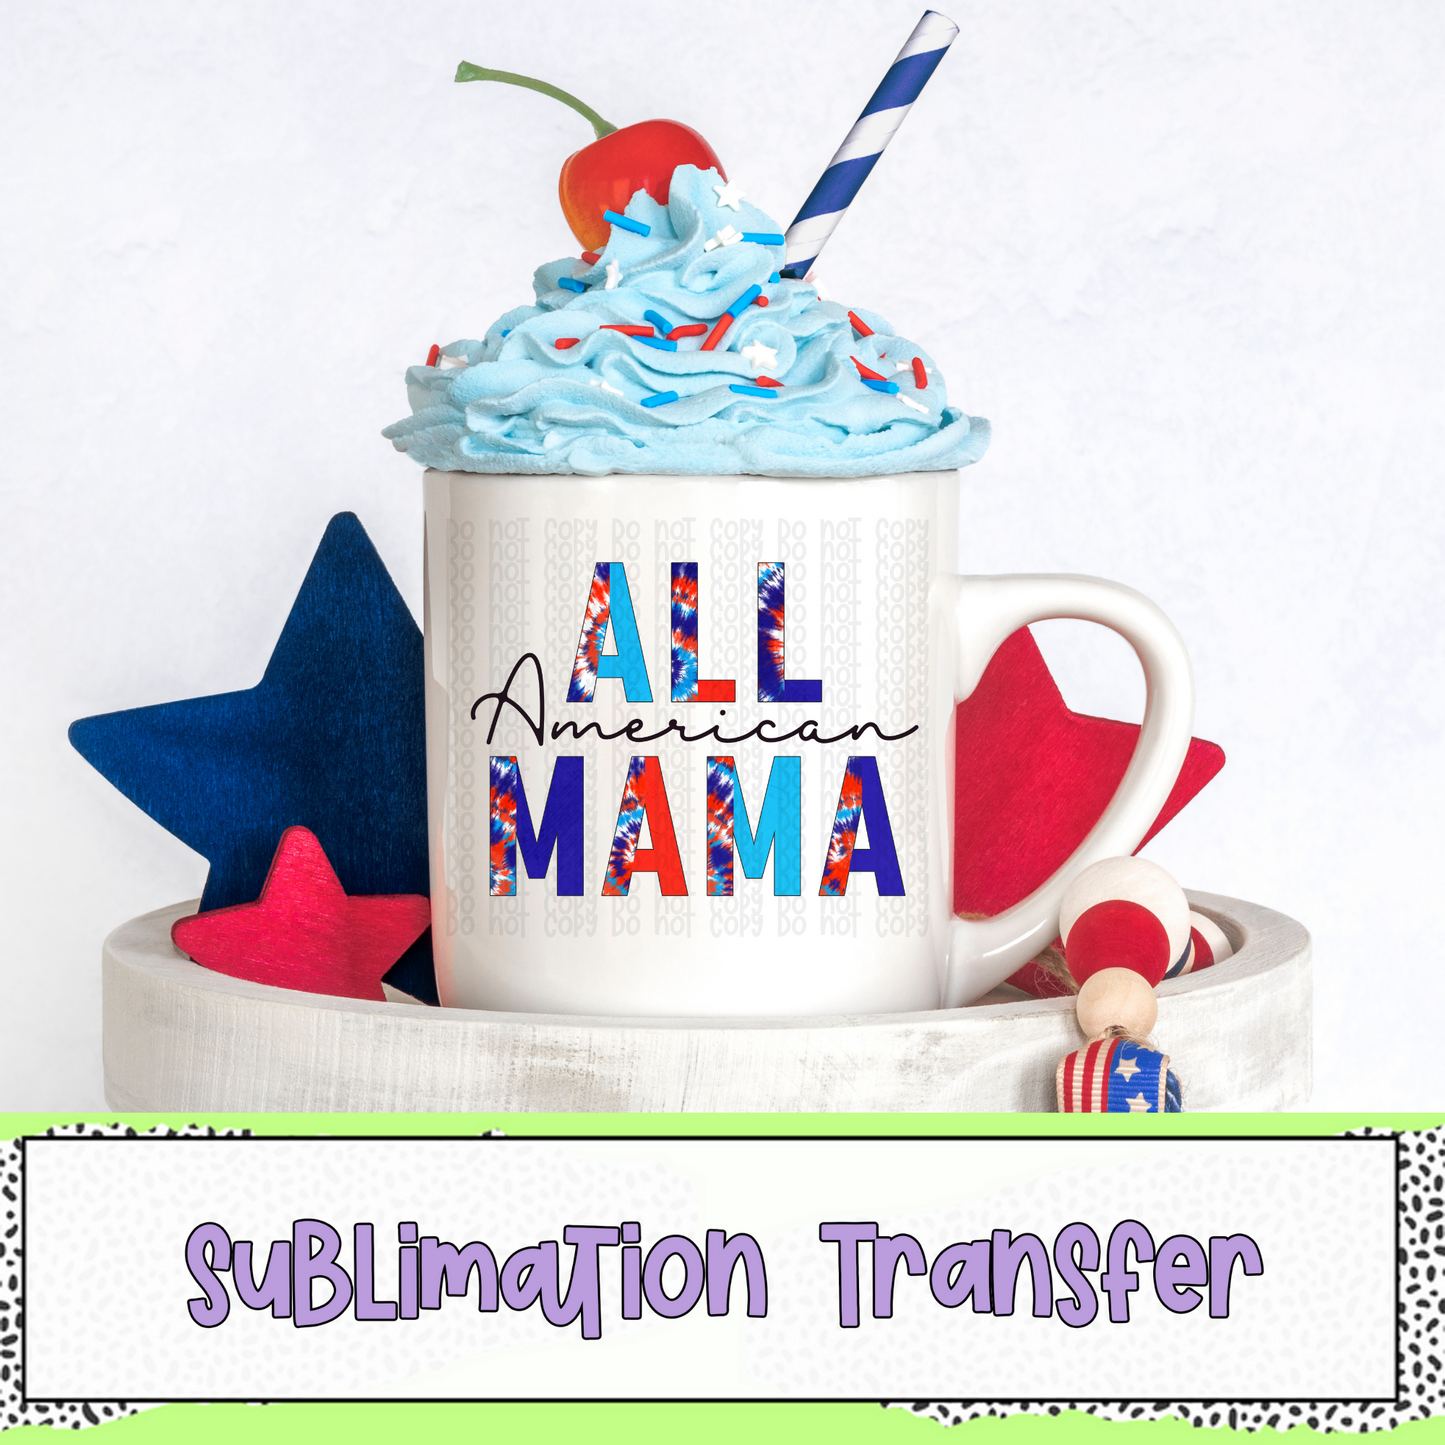 All American Mama - SUBLIMATION TRANSFER